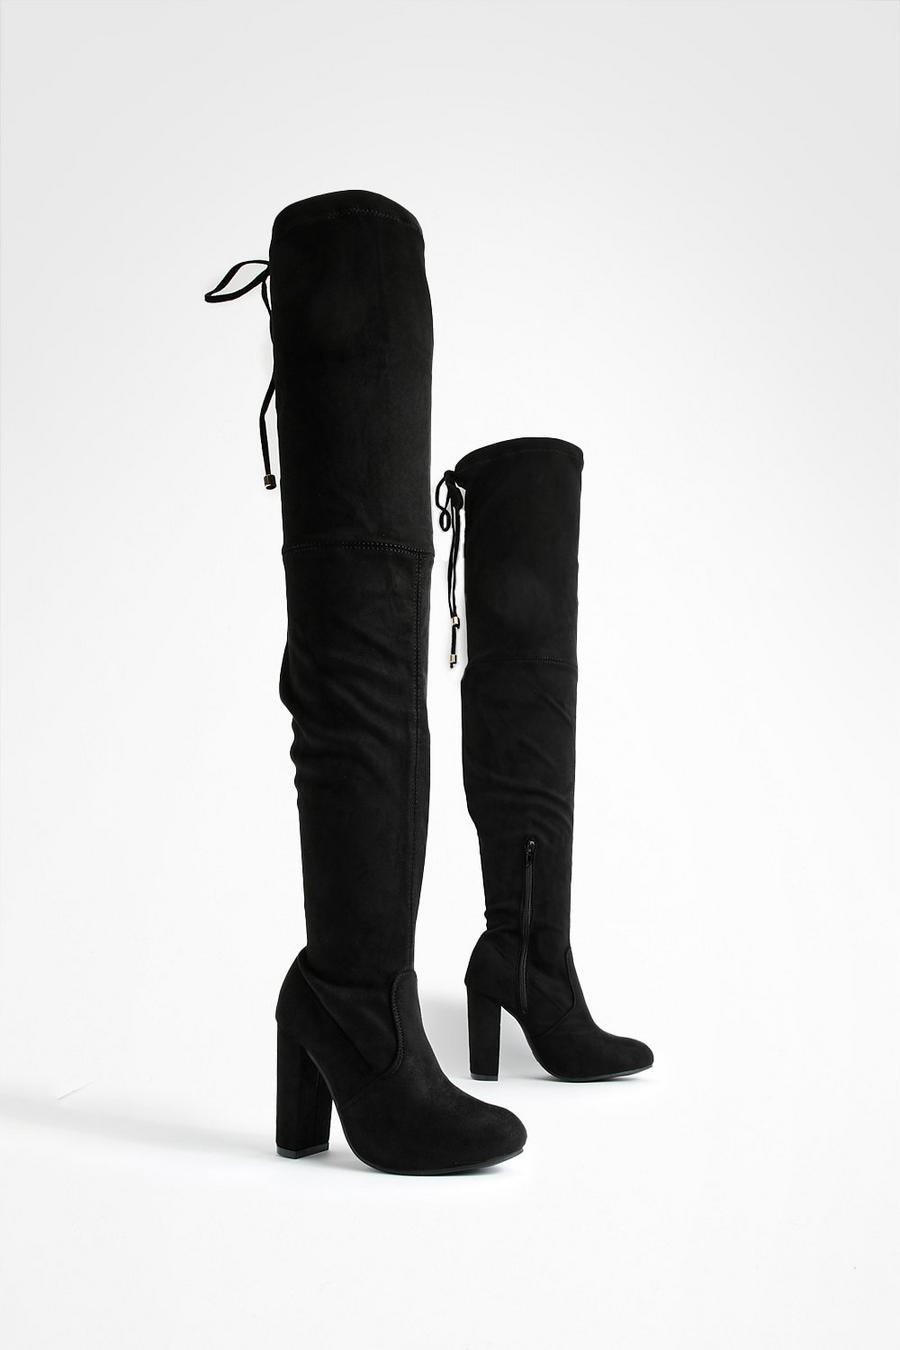 WOMENS LADIES HIGH HEEL TIE UP SMART THIGH HIGH OVER THE KNEE RIDING BOOTS SIZE 